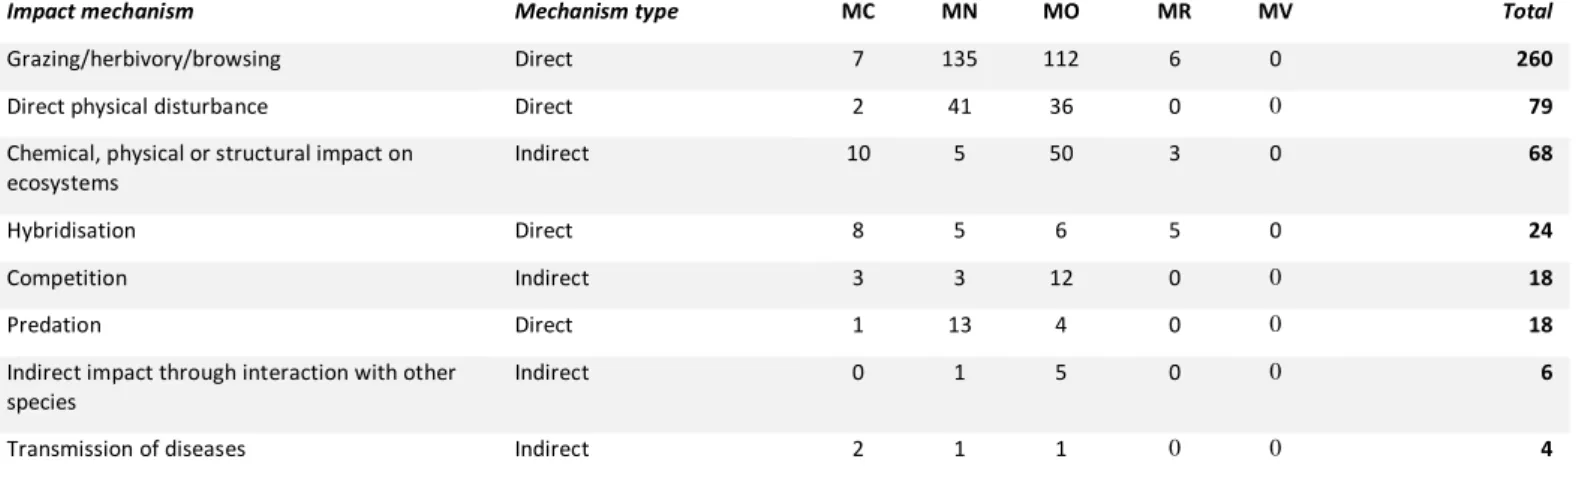 Table S7. Impact mechanisms. Total numbers of impact observations classified by impact magnitude and mechanism  (some impact observations are recorded multiple times because they occurred through multiple mechanisms)